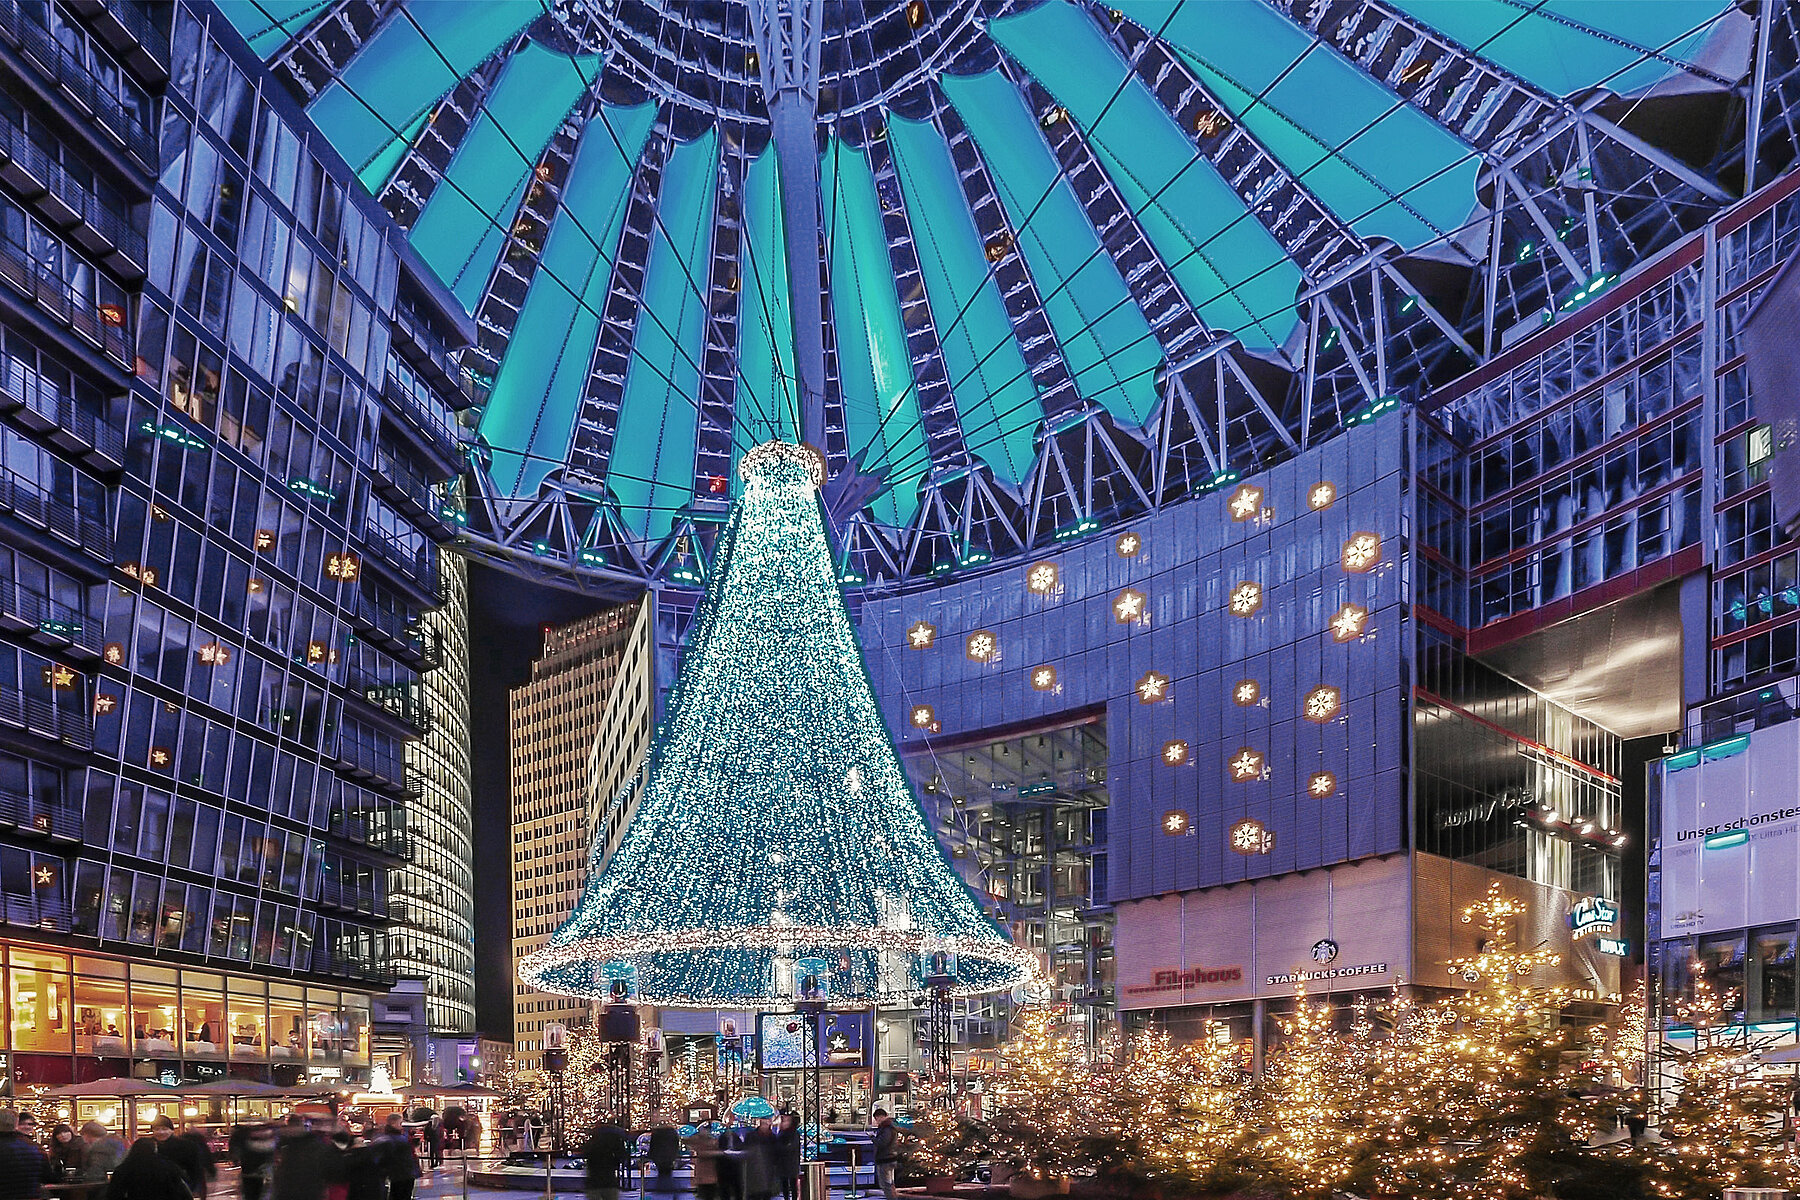 Christmas lights in the courtyard of the Sony Center, which is covered by an umbrella-like structure.